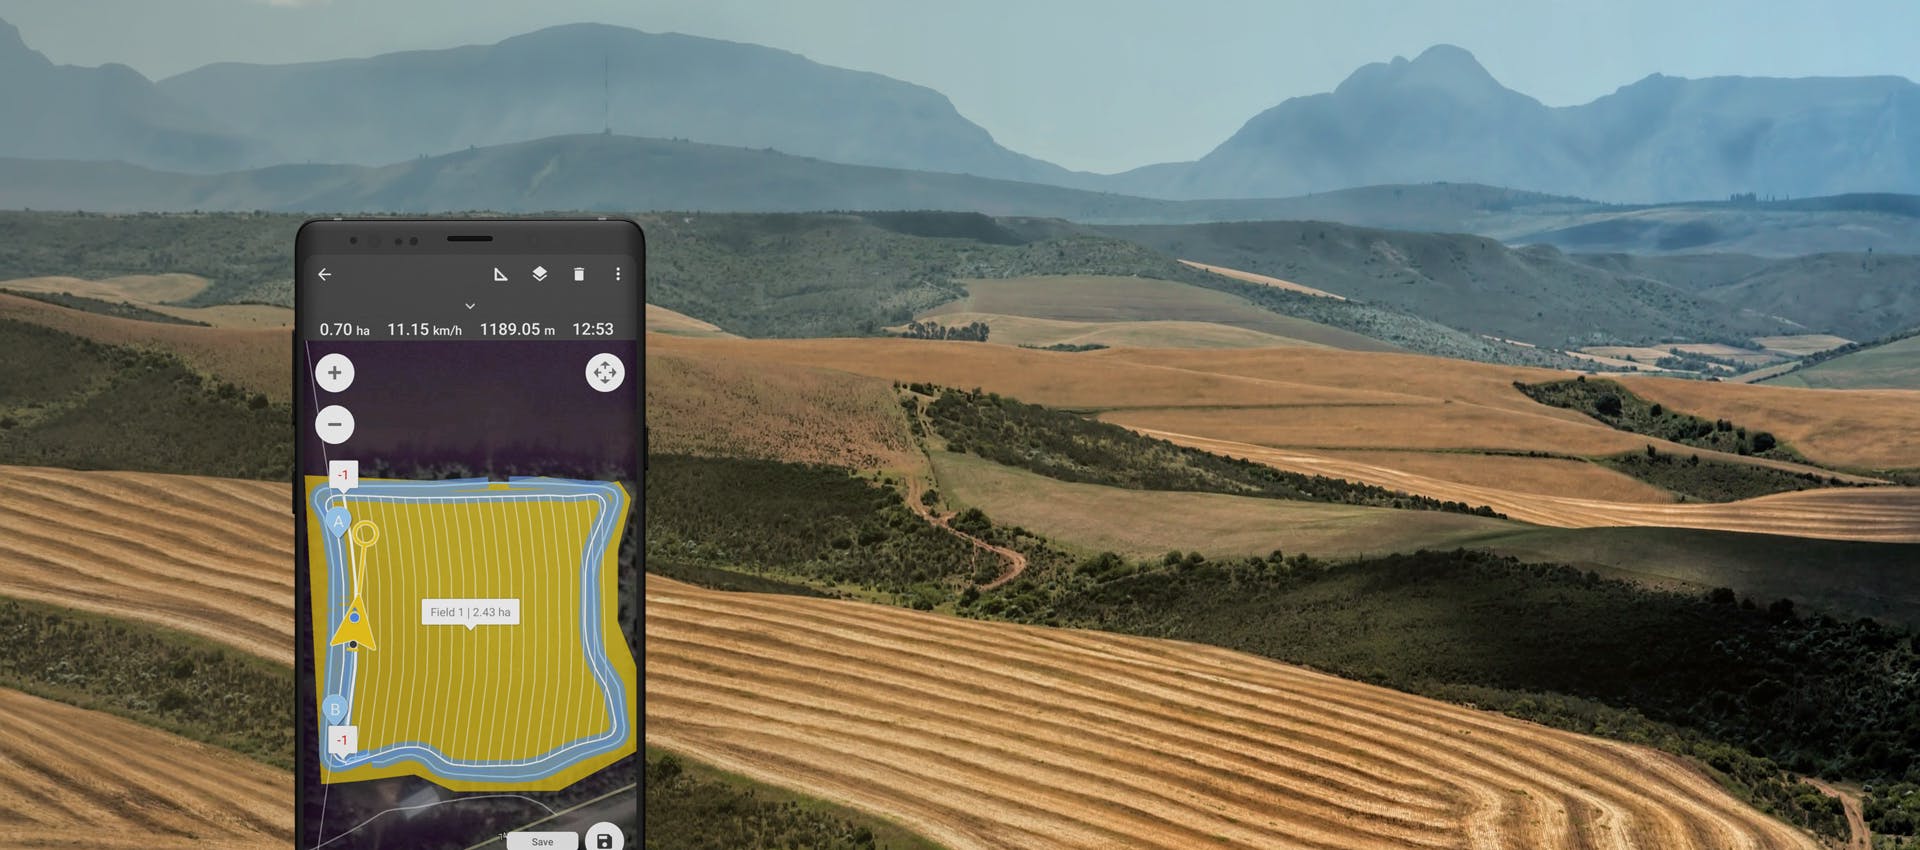 FieldBee tractor GPS navigation app 7.1.3 update, what’s new?